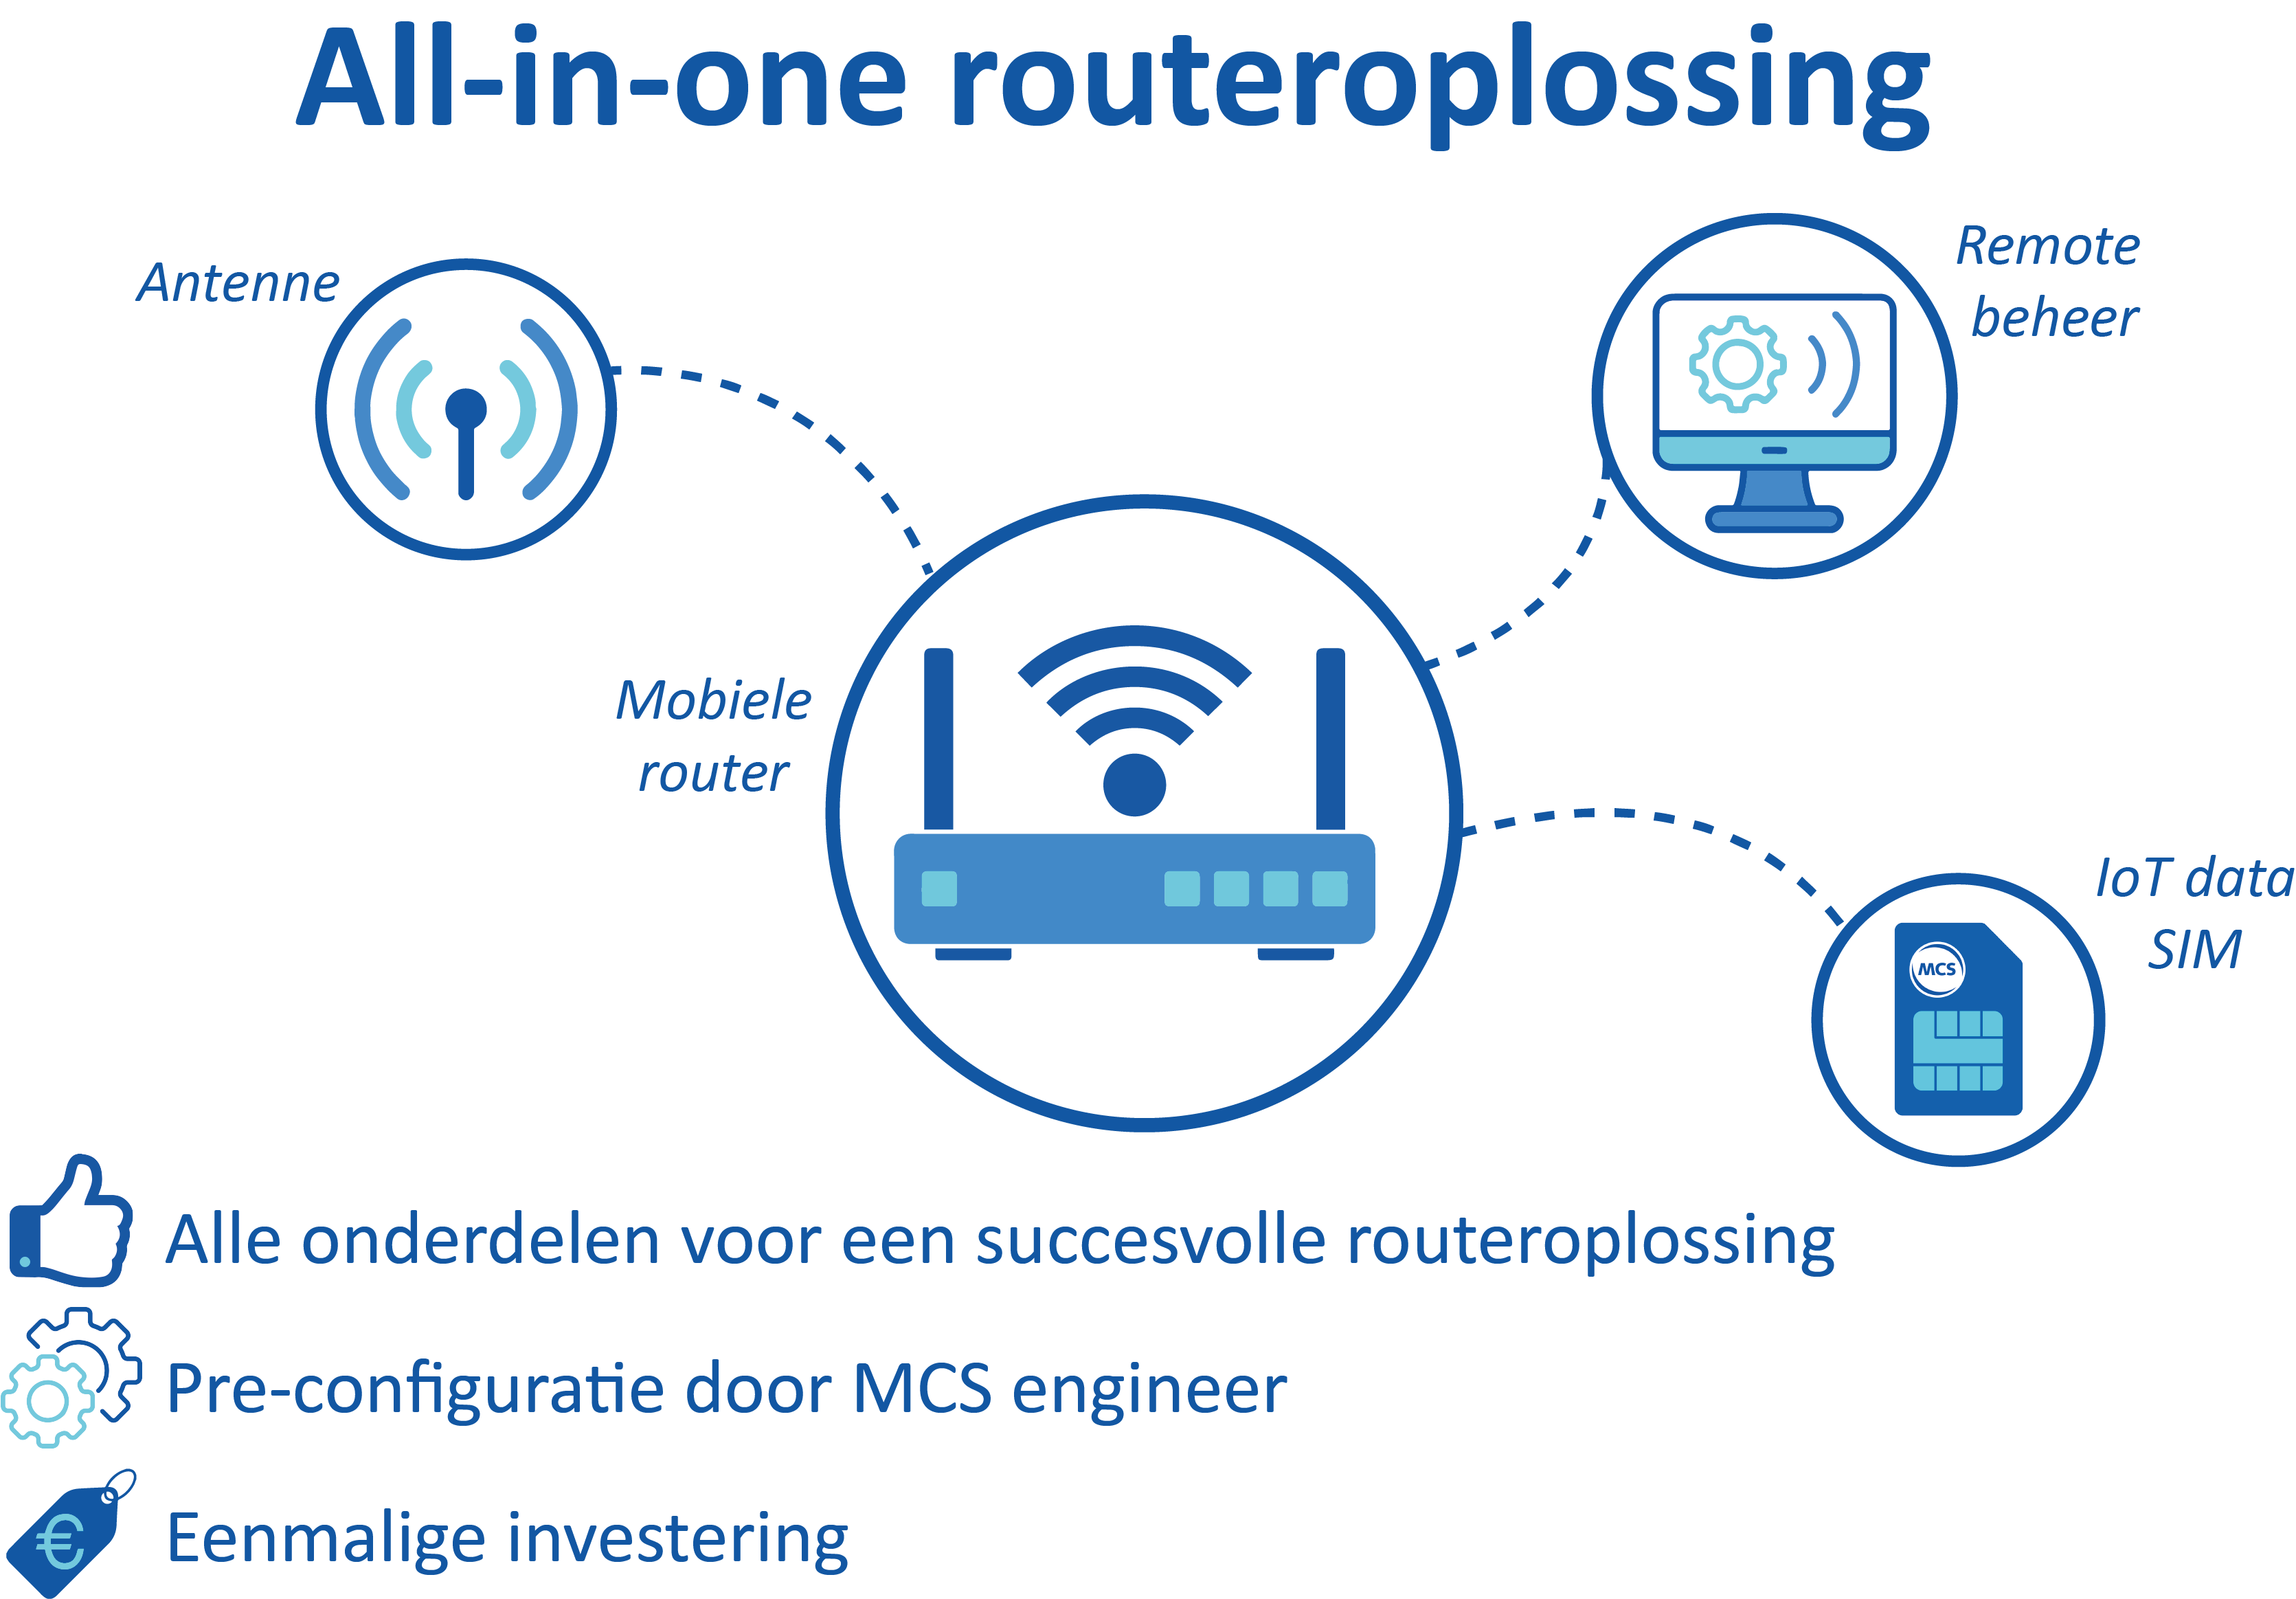 All-In-One Teltonika TRB140 | 4G routers, All-in-One routers | Product | MCS